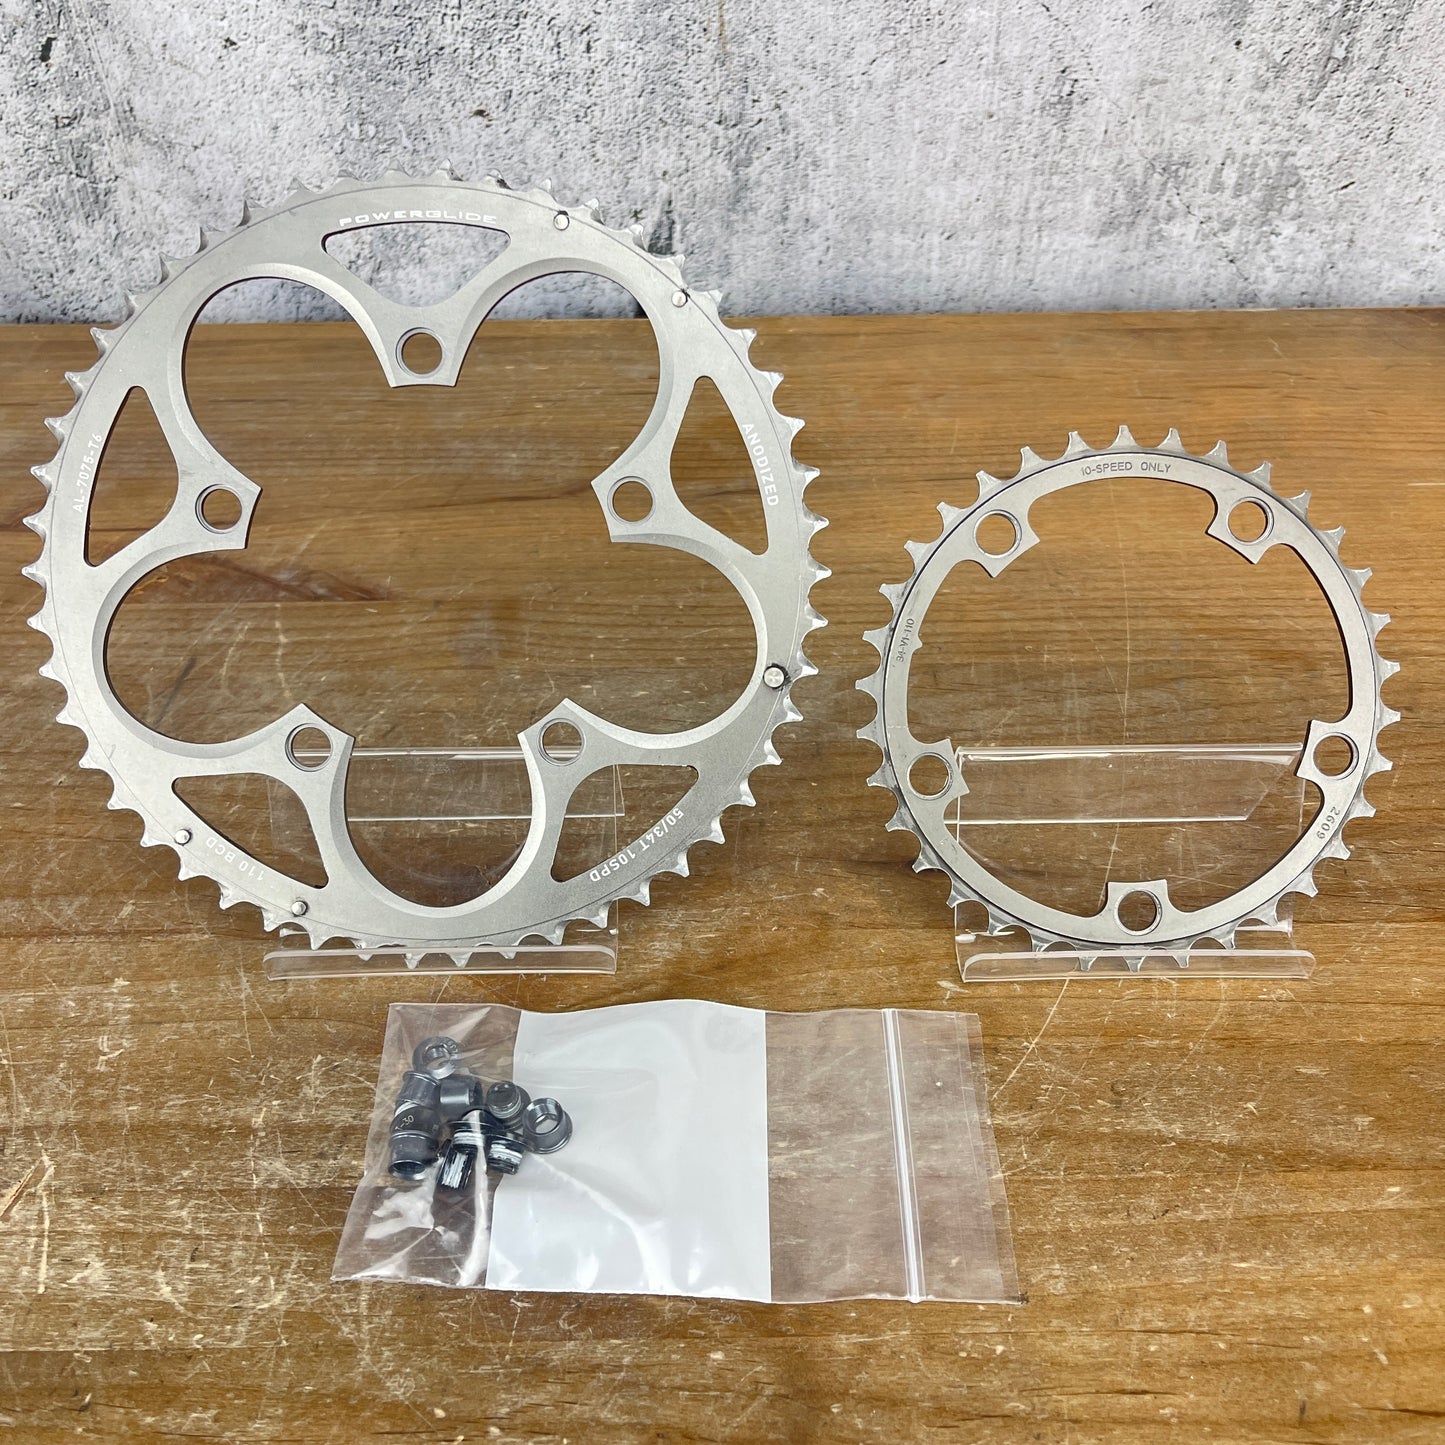 SRAM Powerglide Anodized 50/34t 110BCD 10/11-Speed Road Bike Chainrings 132g